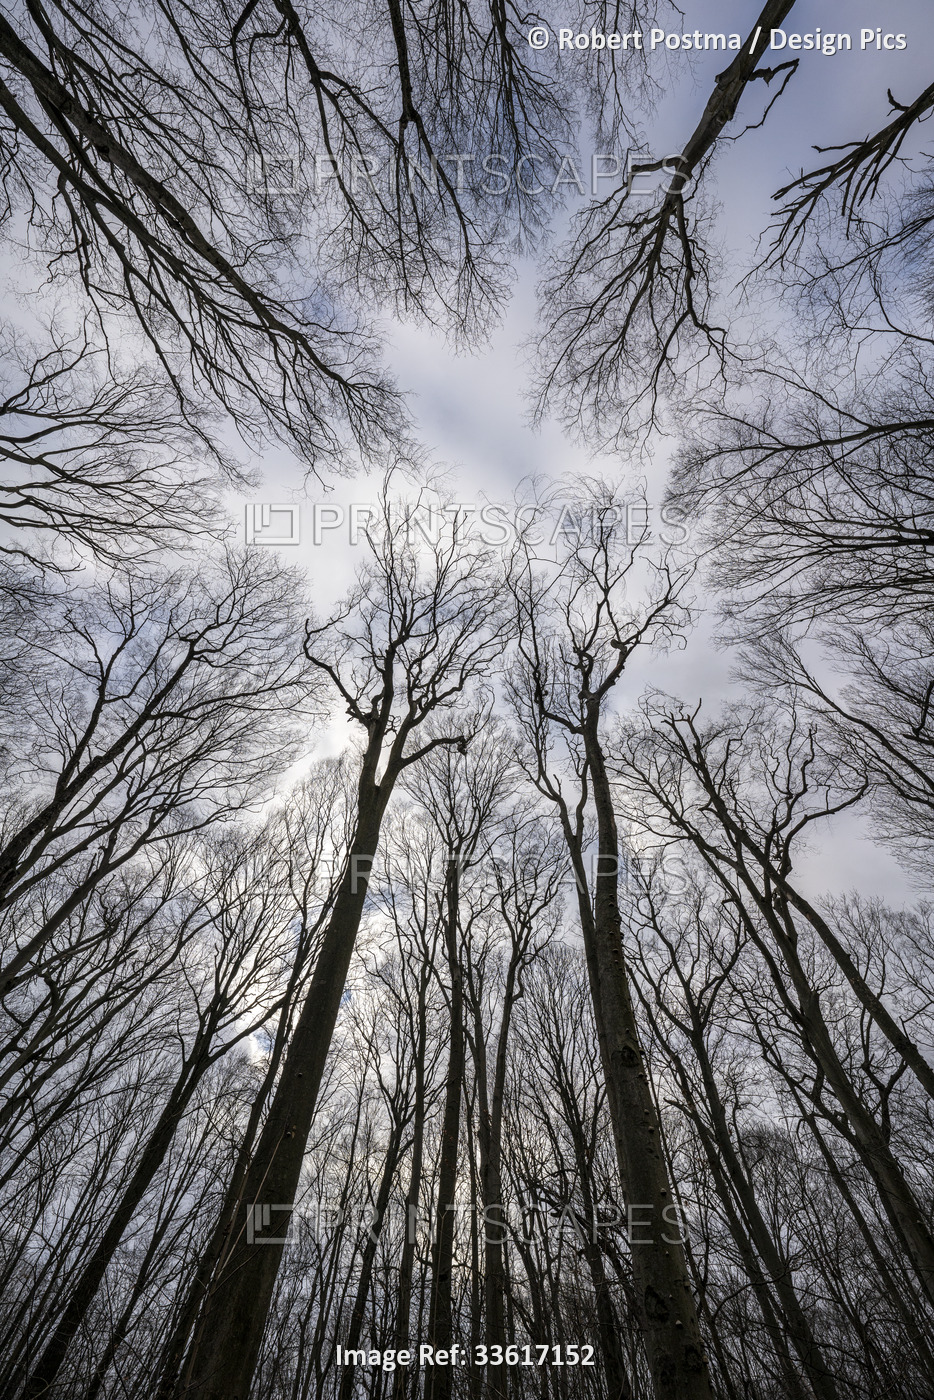 Looking up into the canopy of leafless trees of an Ontario forest in winter; ...